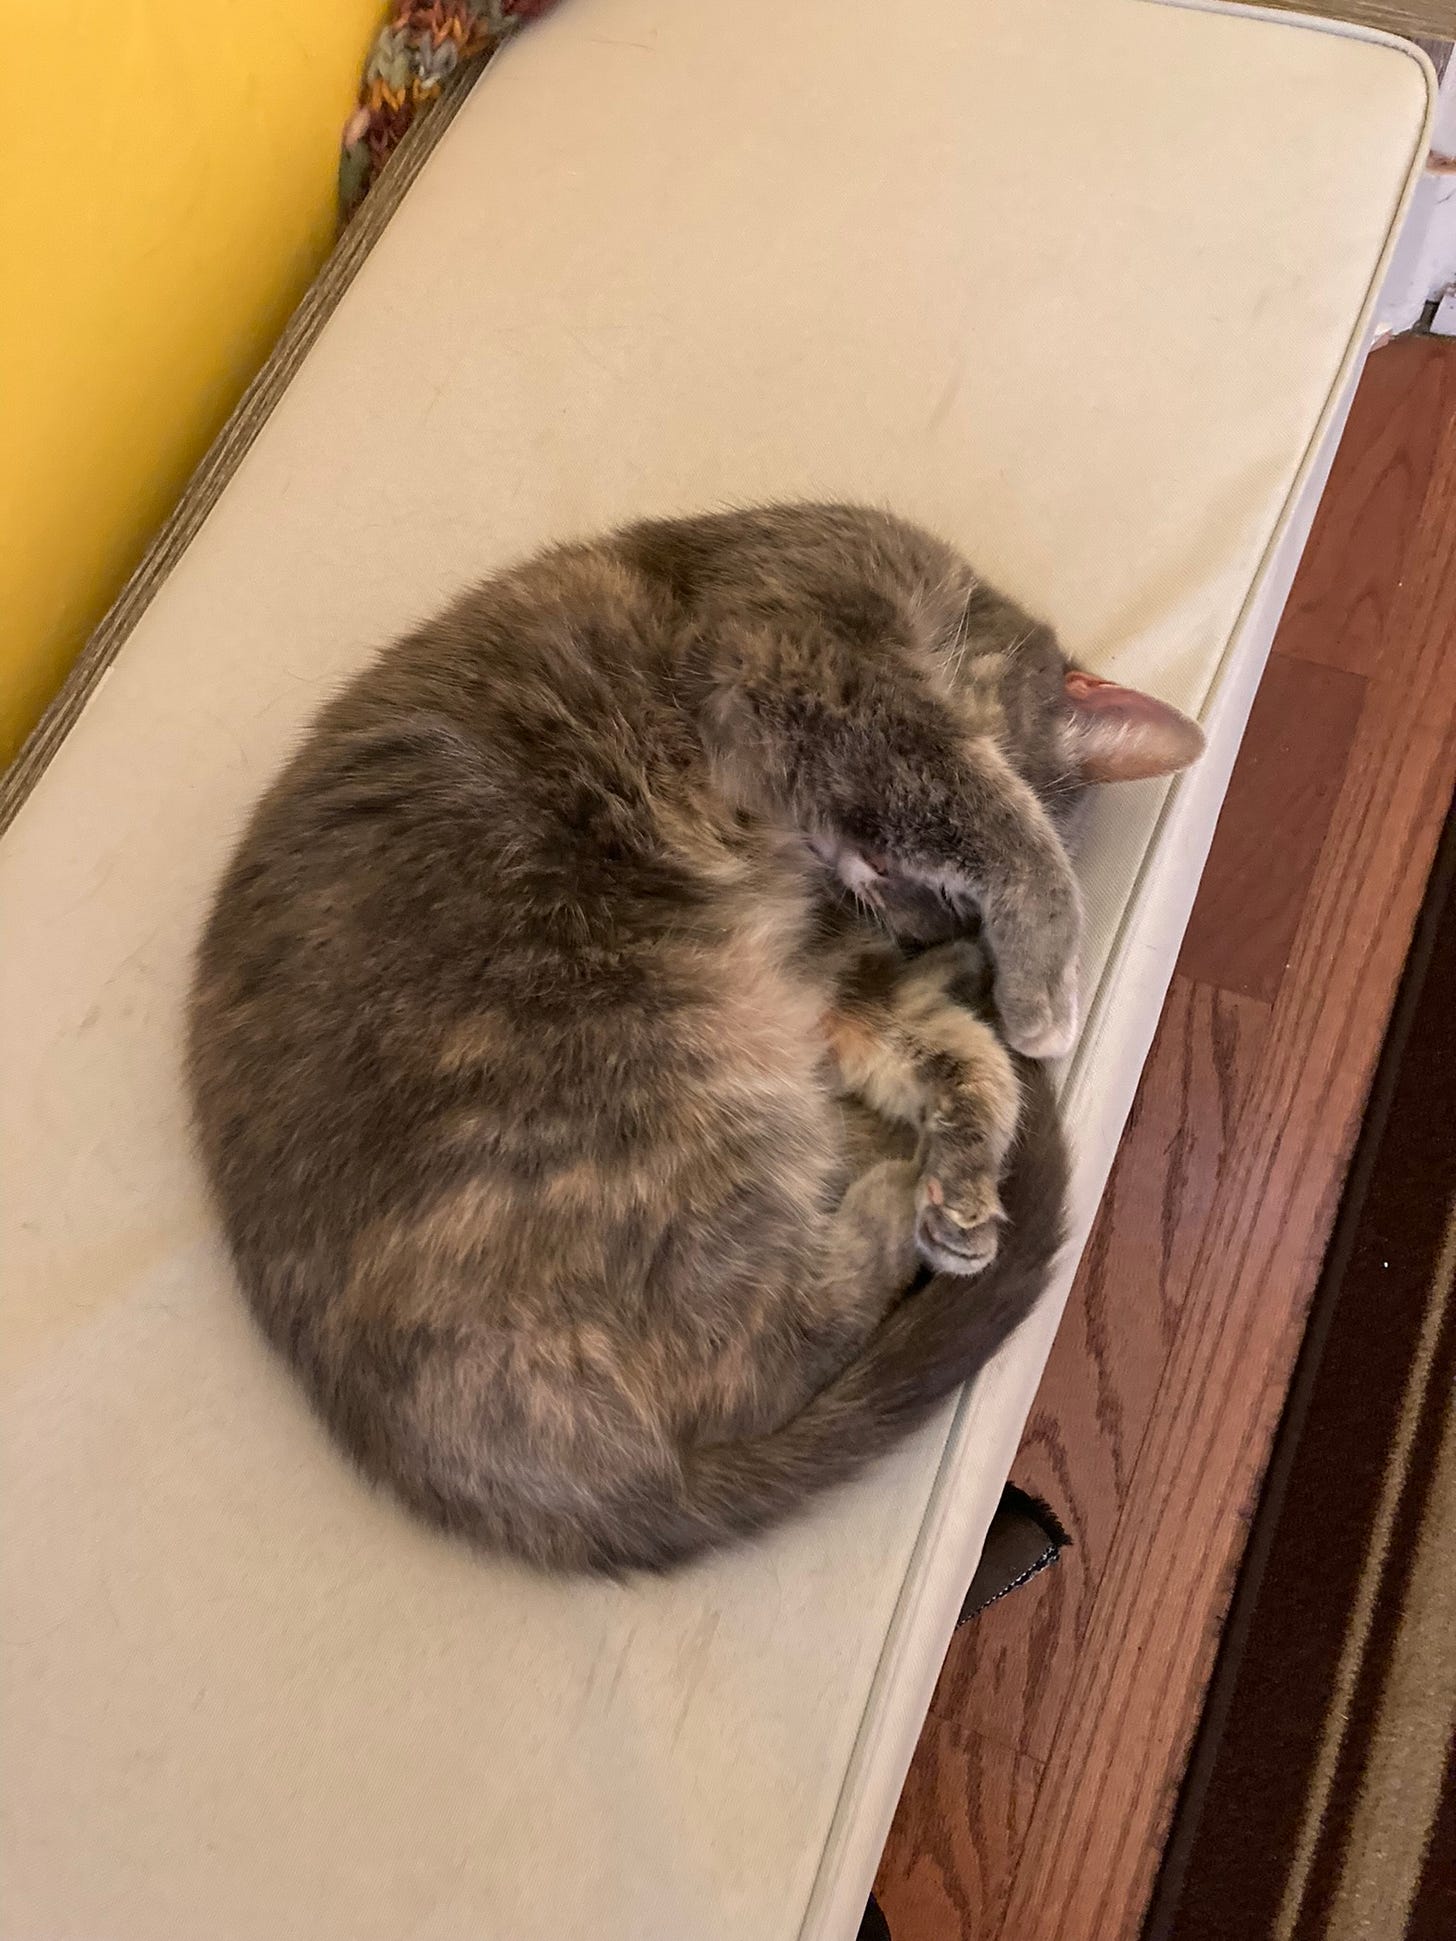 Adorable grey cat curled up with her paw covering her face